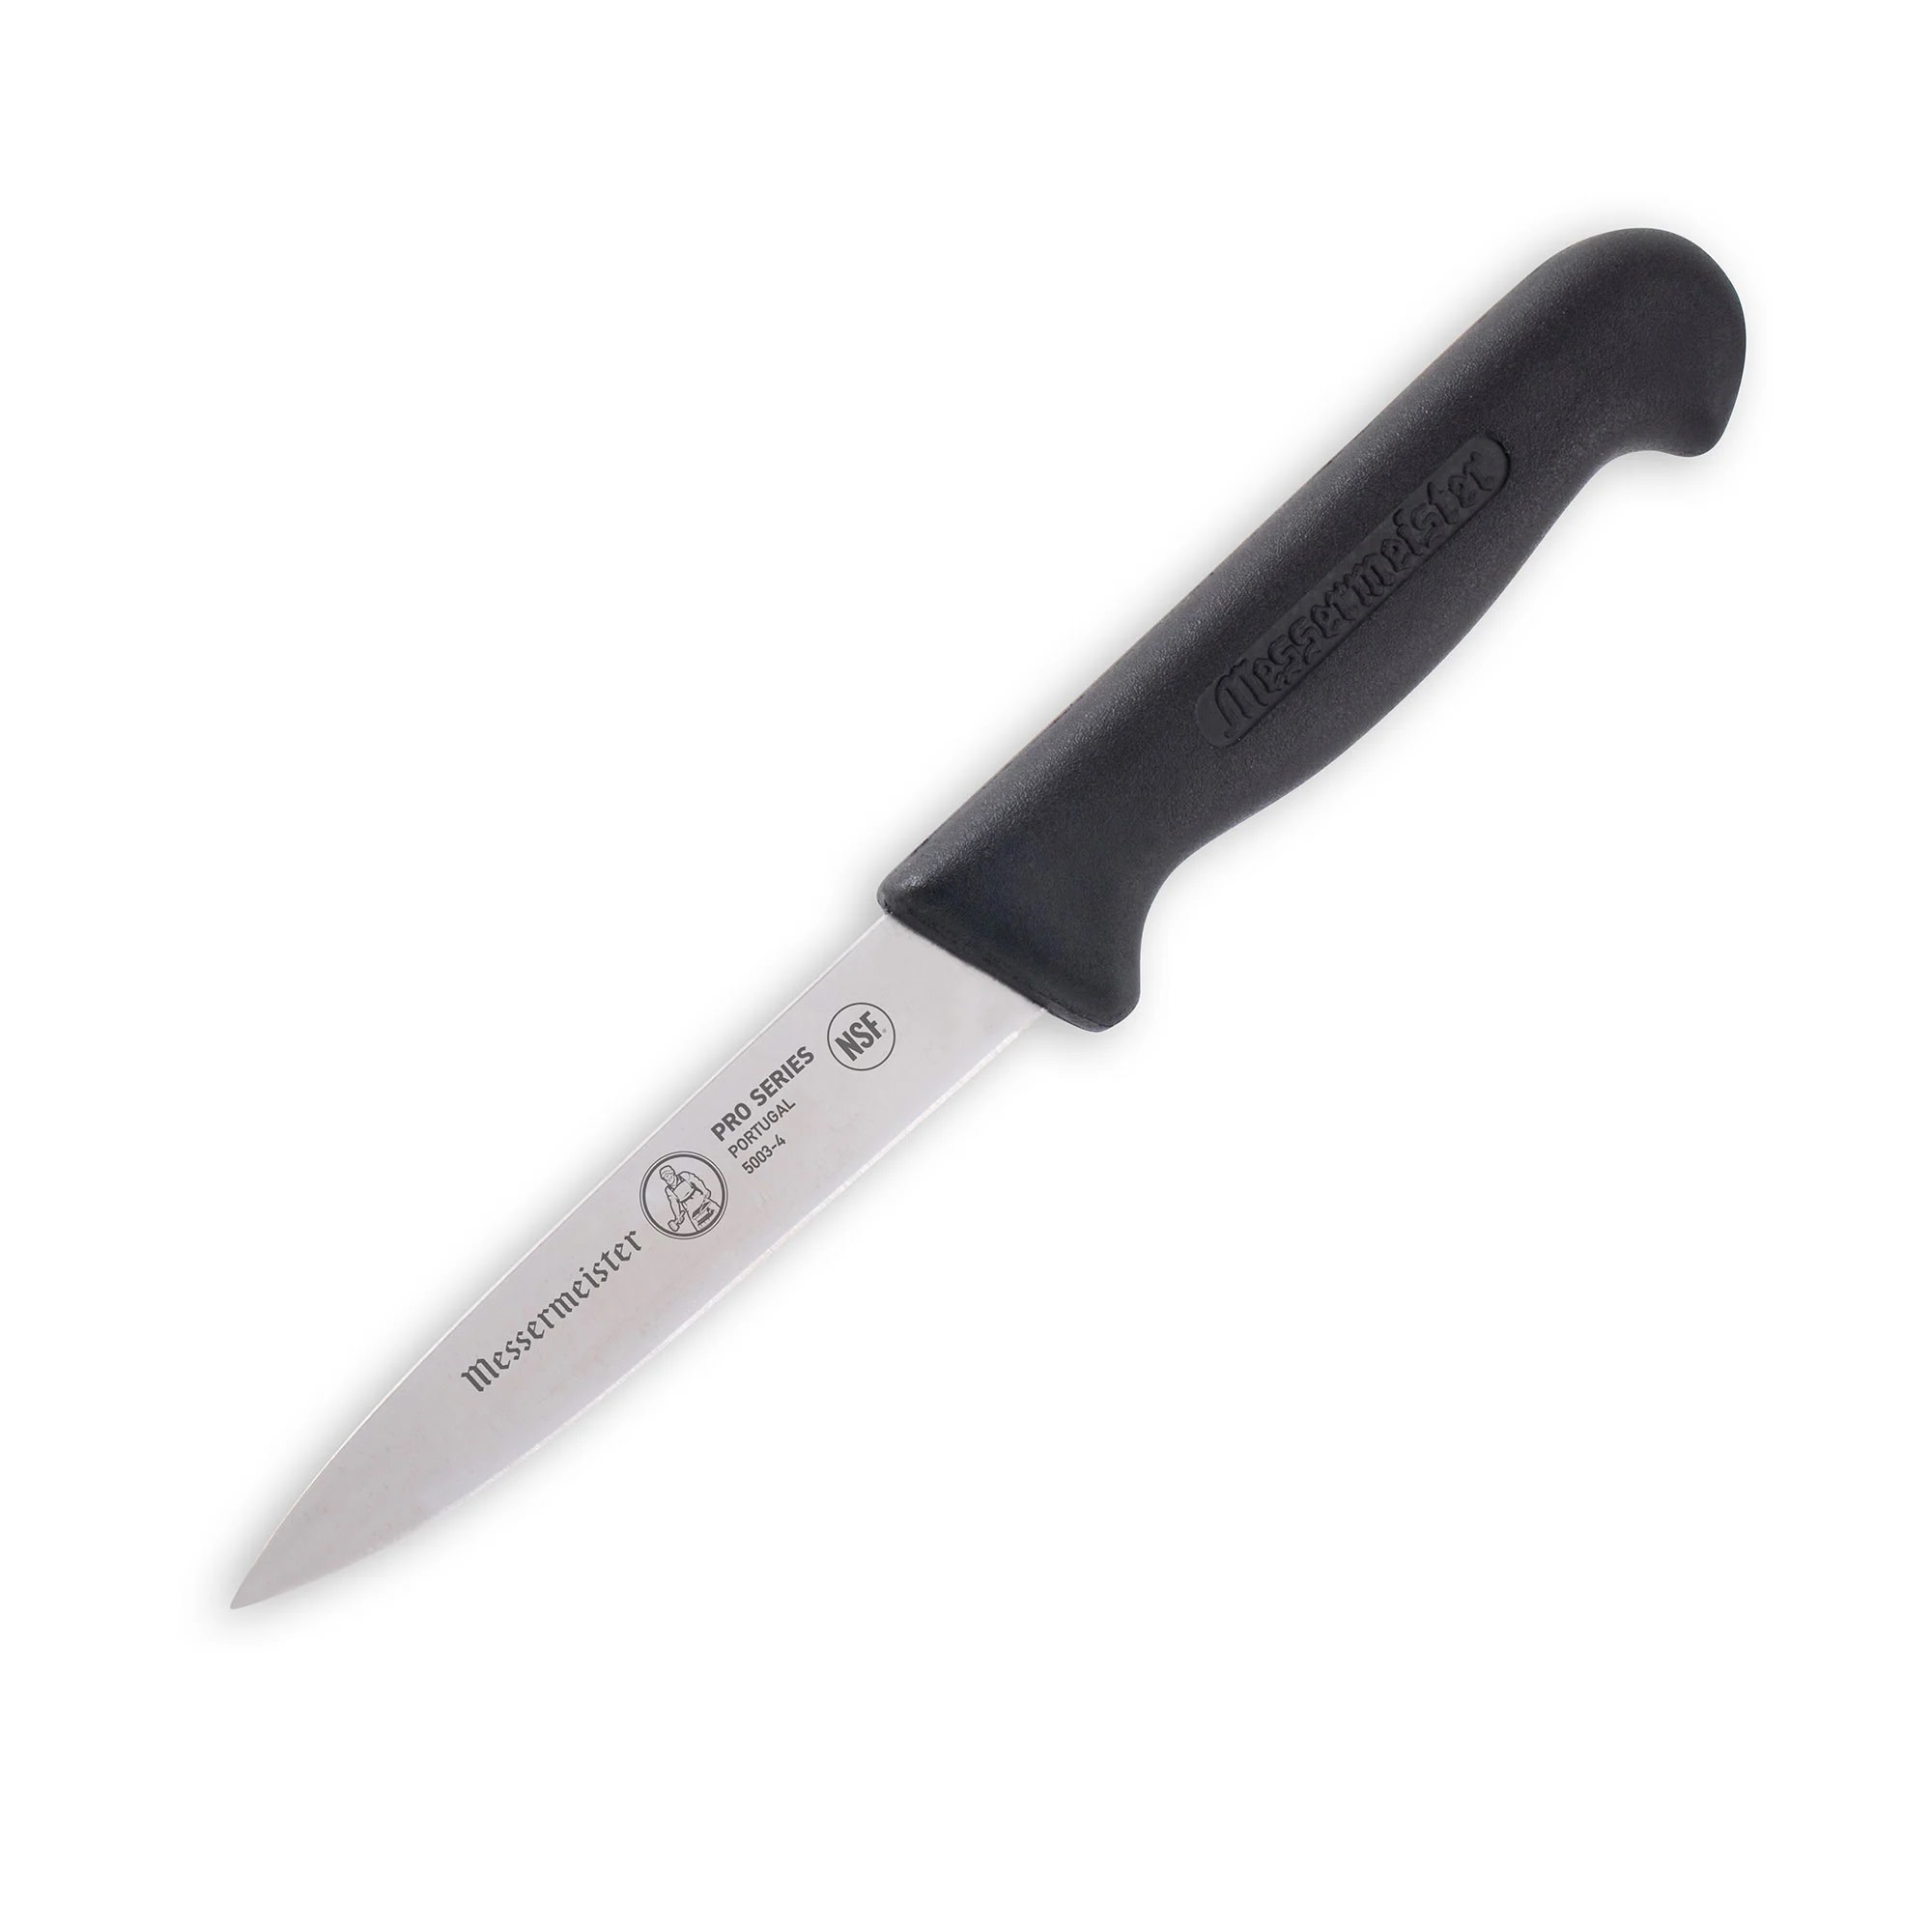 Pro Series Spear Point Paring Knife - 4 inch